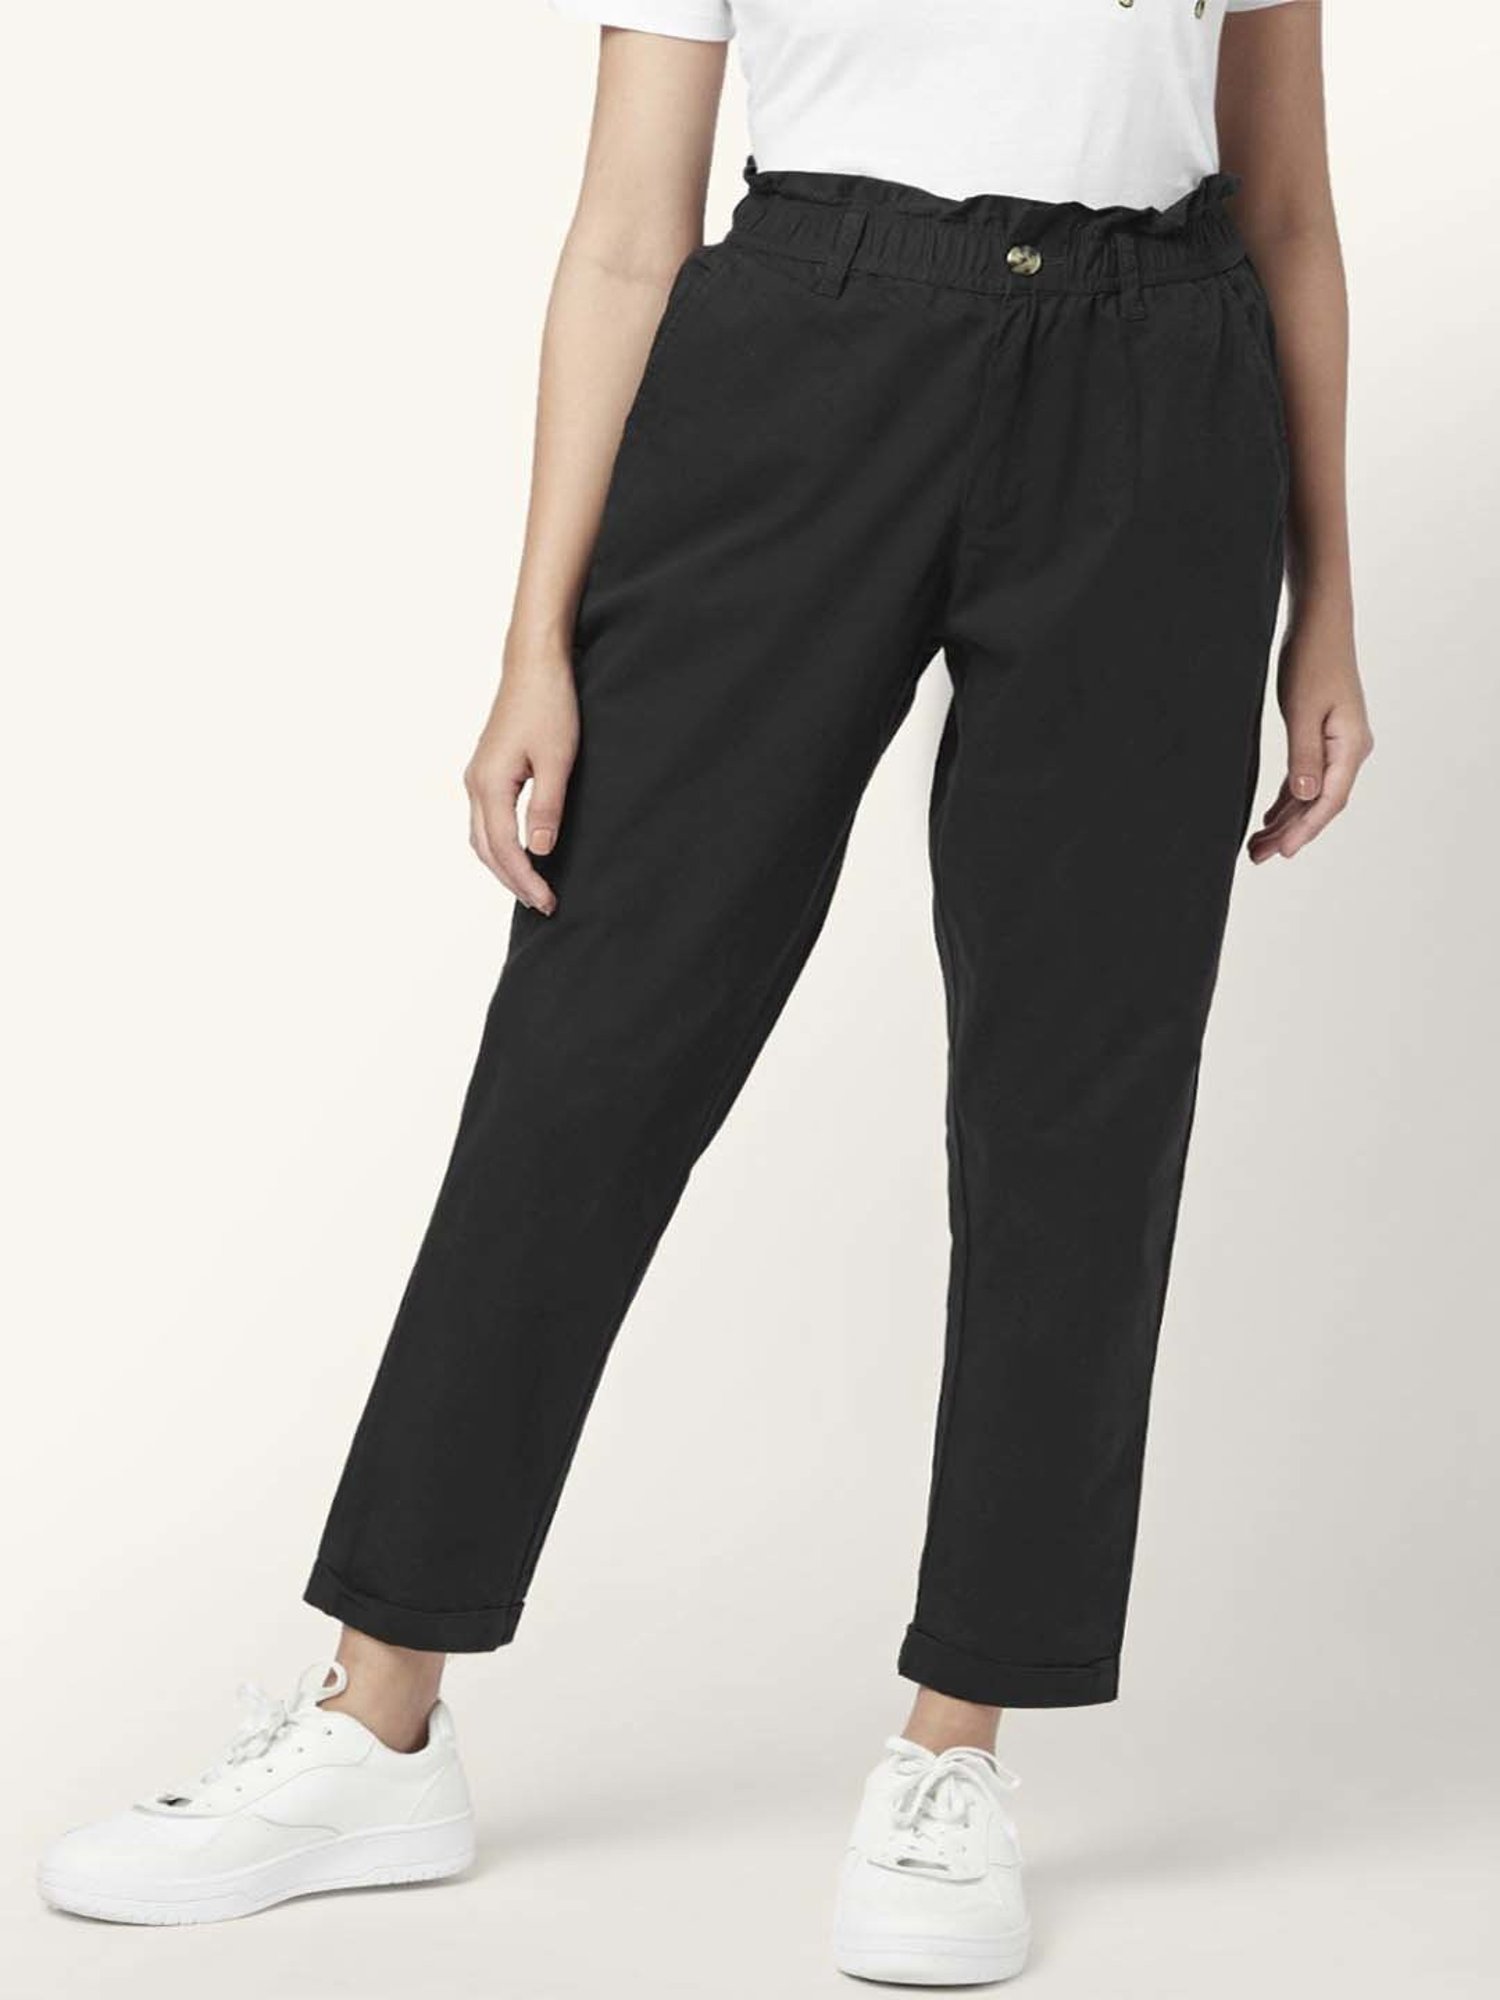 Buy Pantaloons Formal Trousers online  Women  12 products  FASHIOLAin